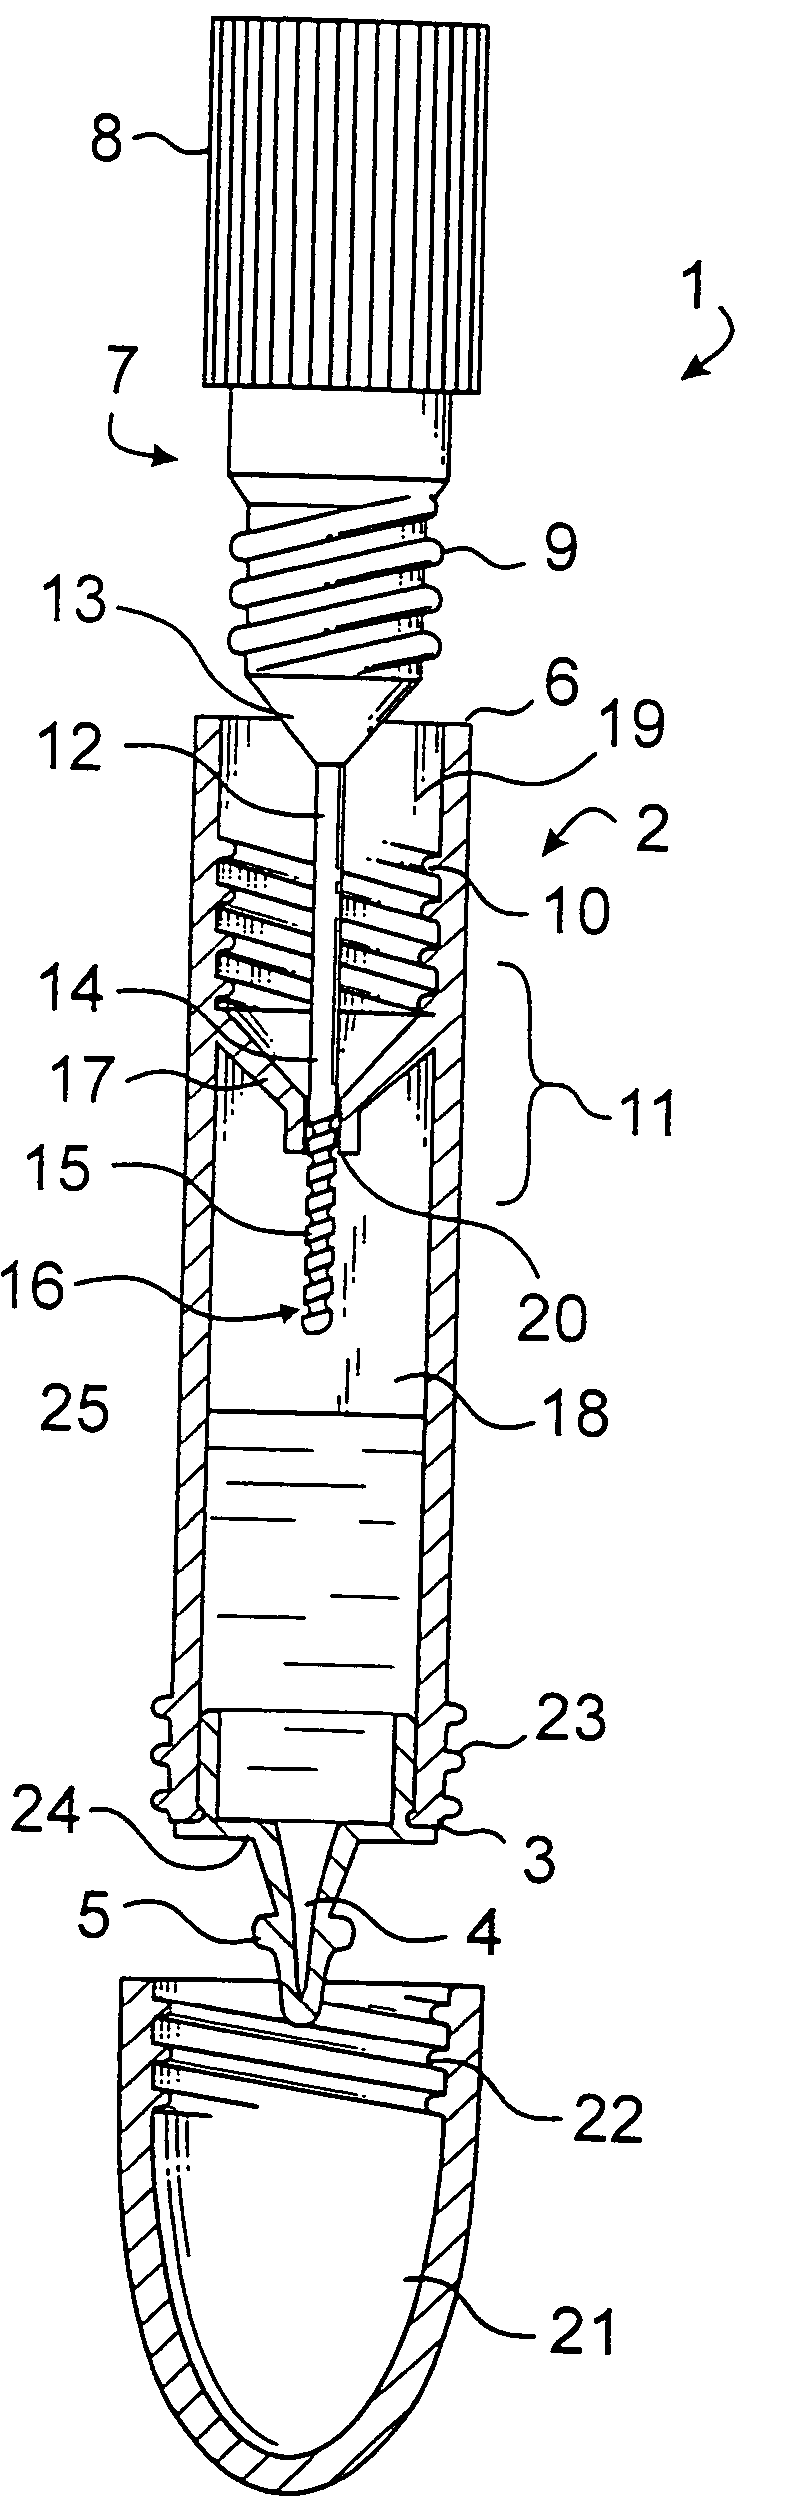 Specimen collection and application apparatus